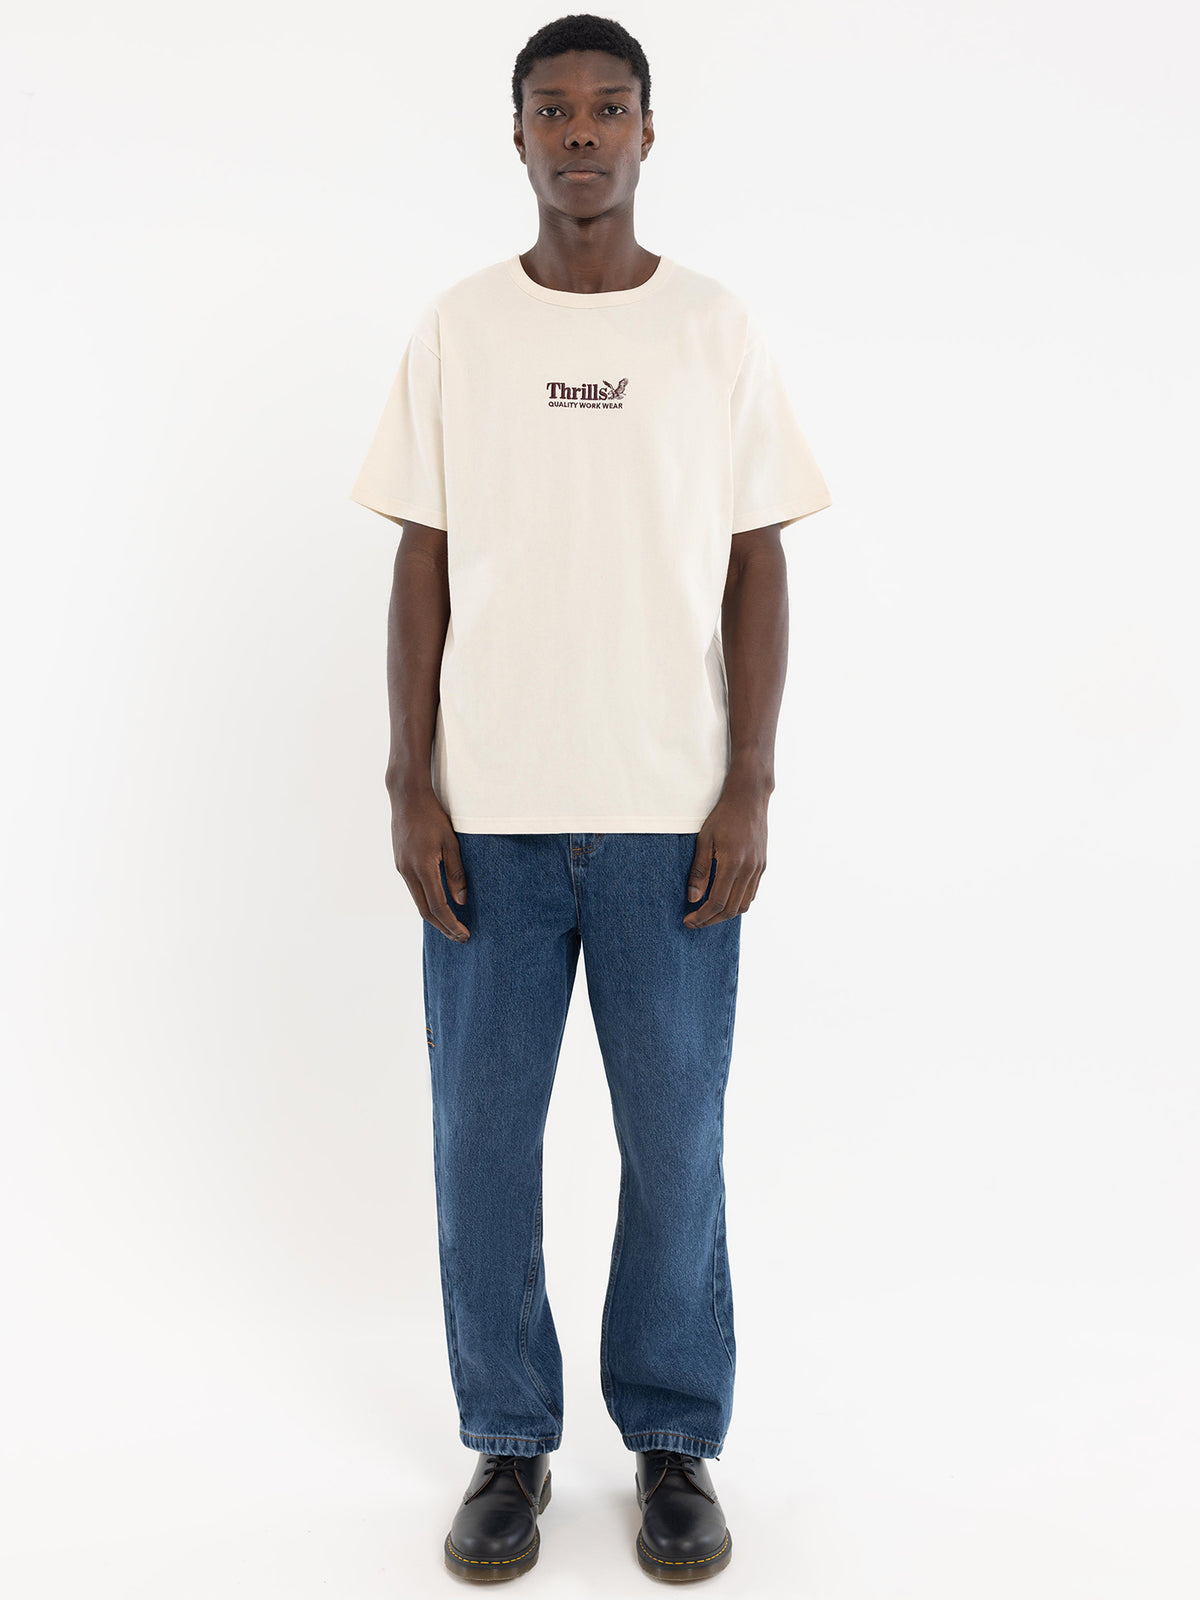 Workwear Embroidered Merch Fit T-Shirt